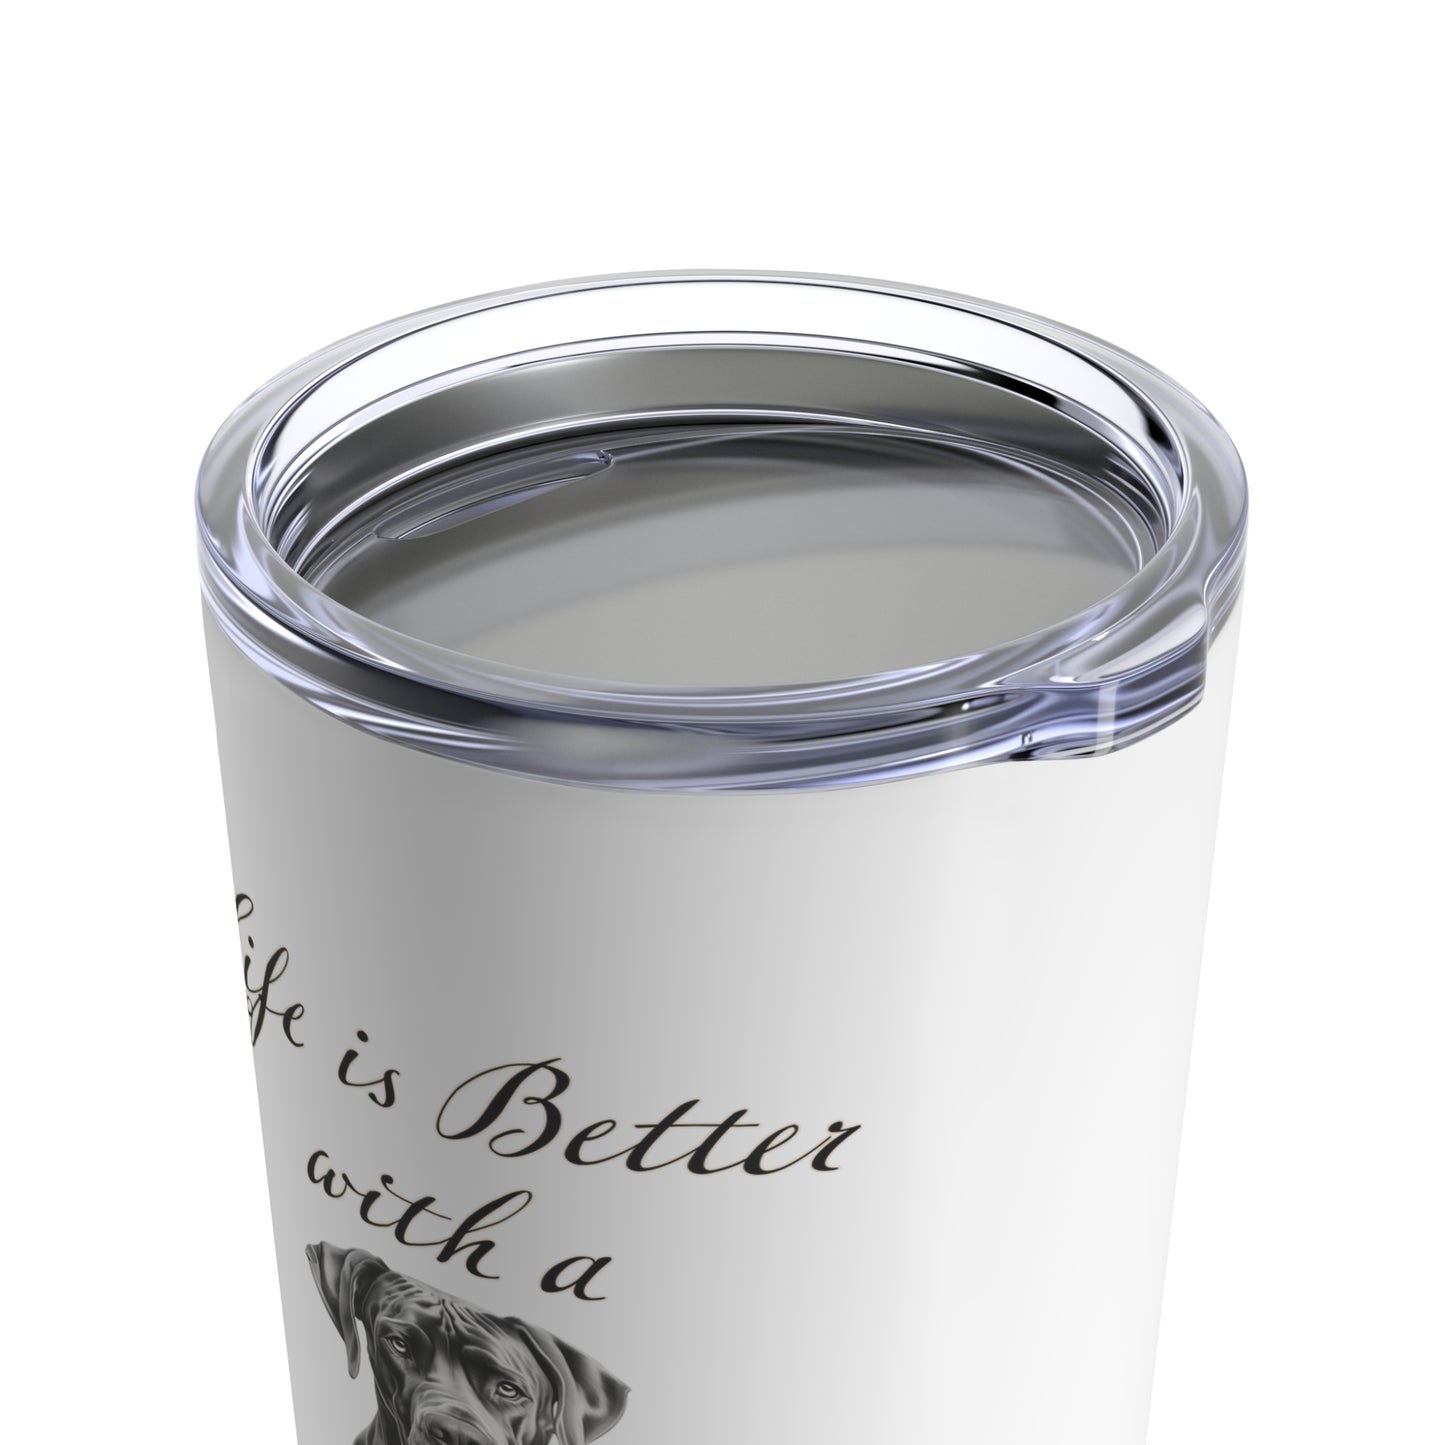 Life is Better with a Great Dane Tumbler, Stainless Steel 20oz